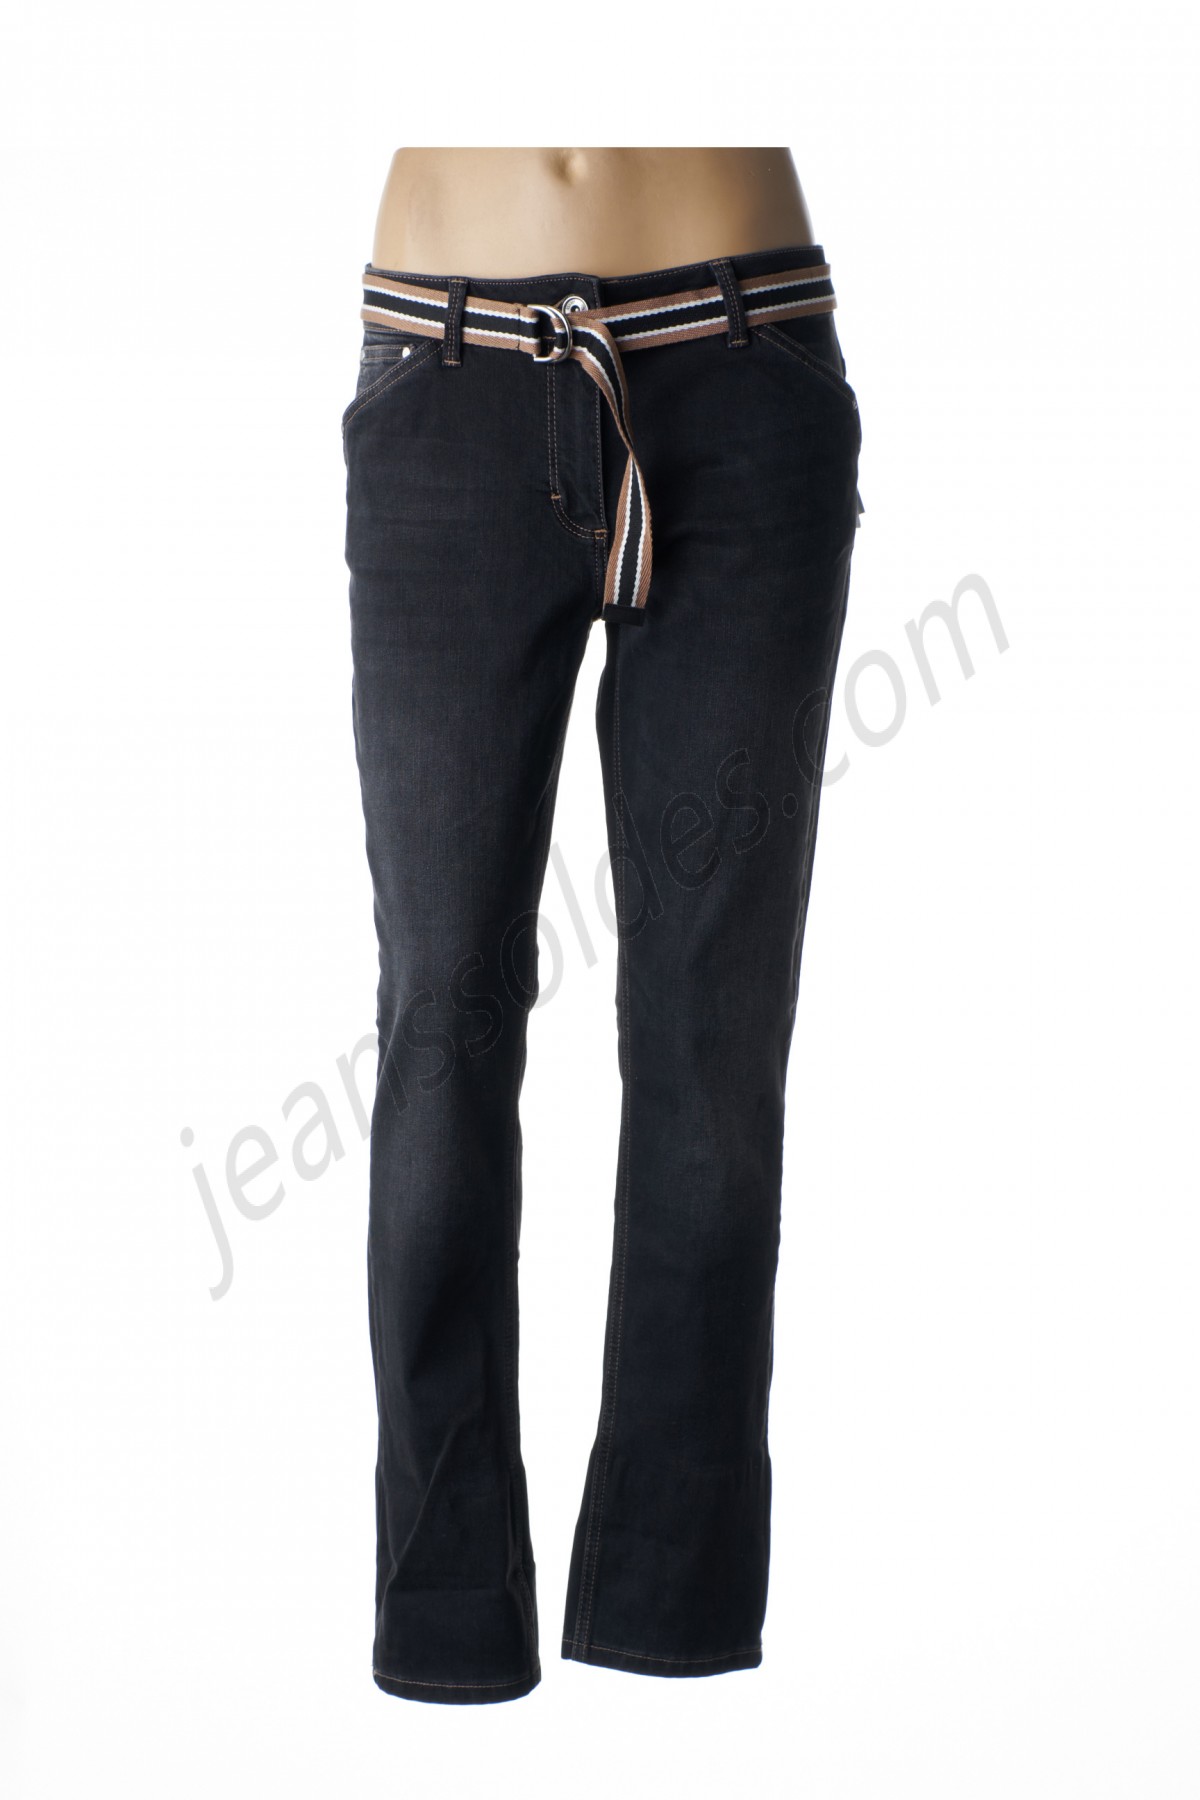 betty barclay-Jeans coupe slim prix d’amis - -0